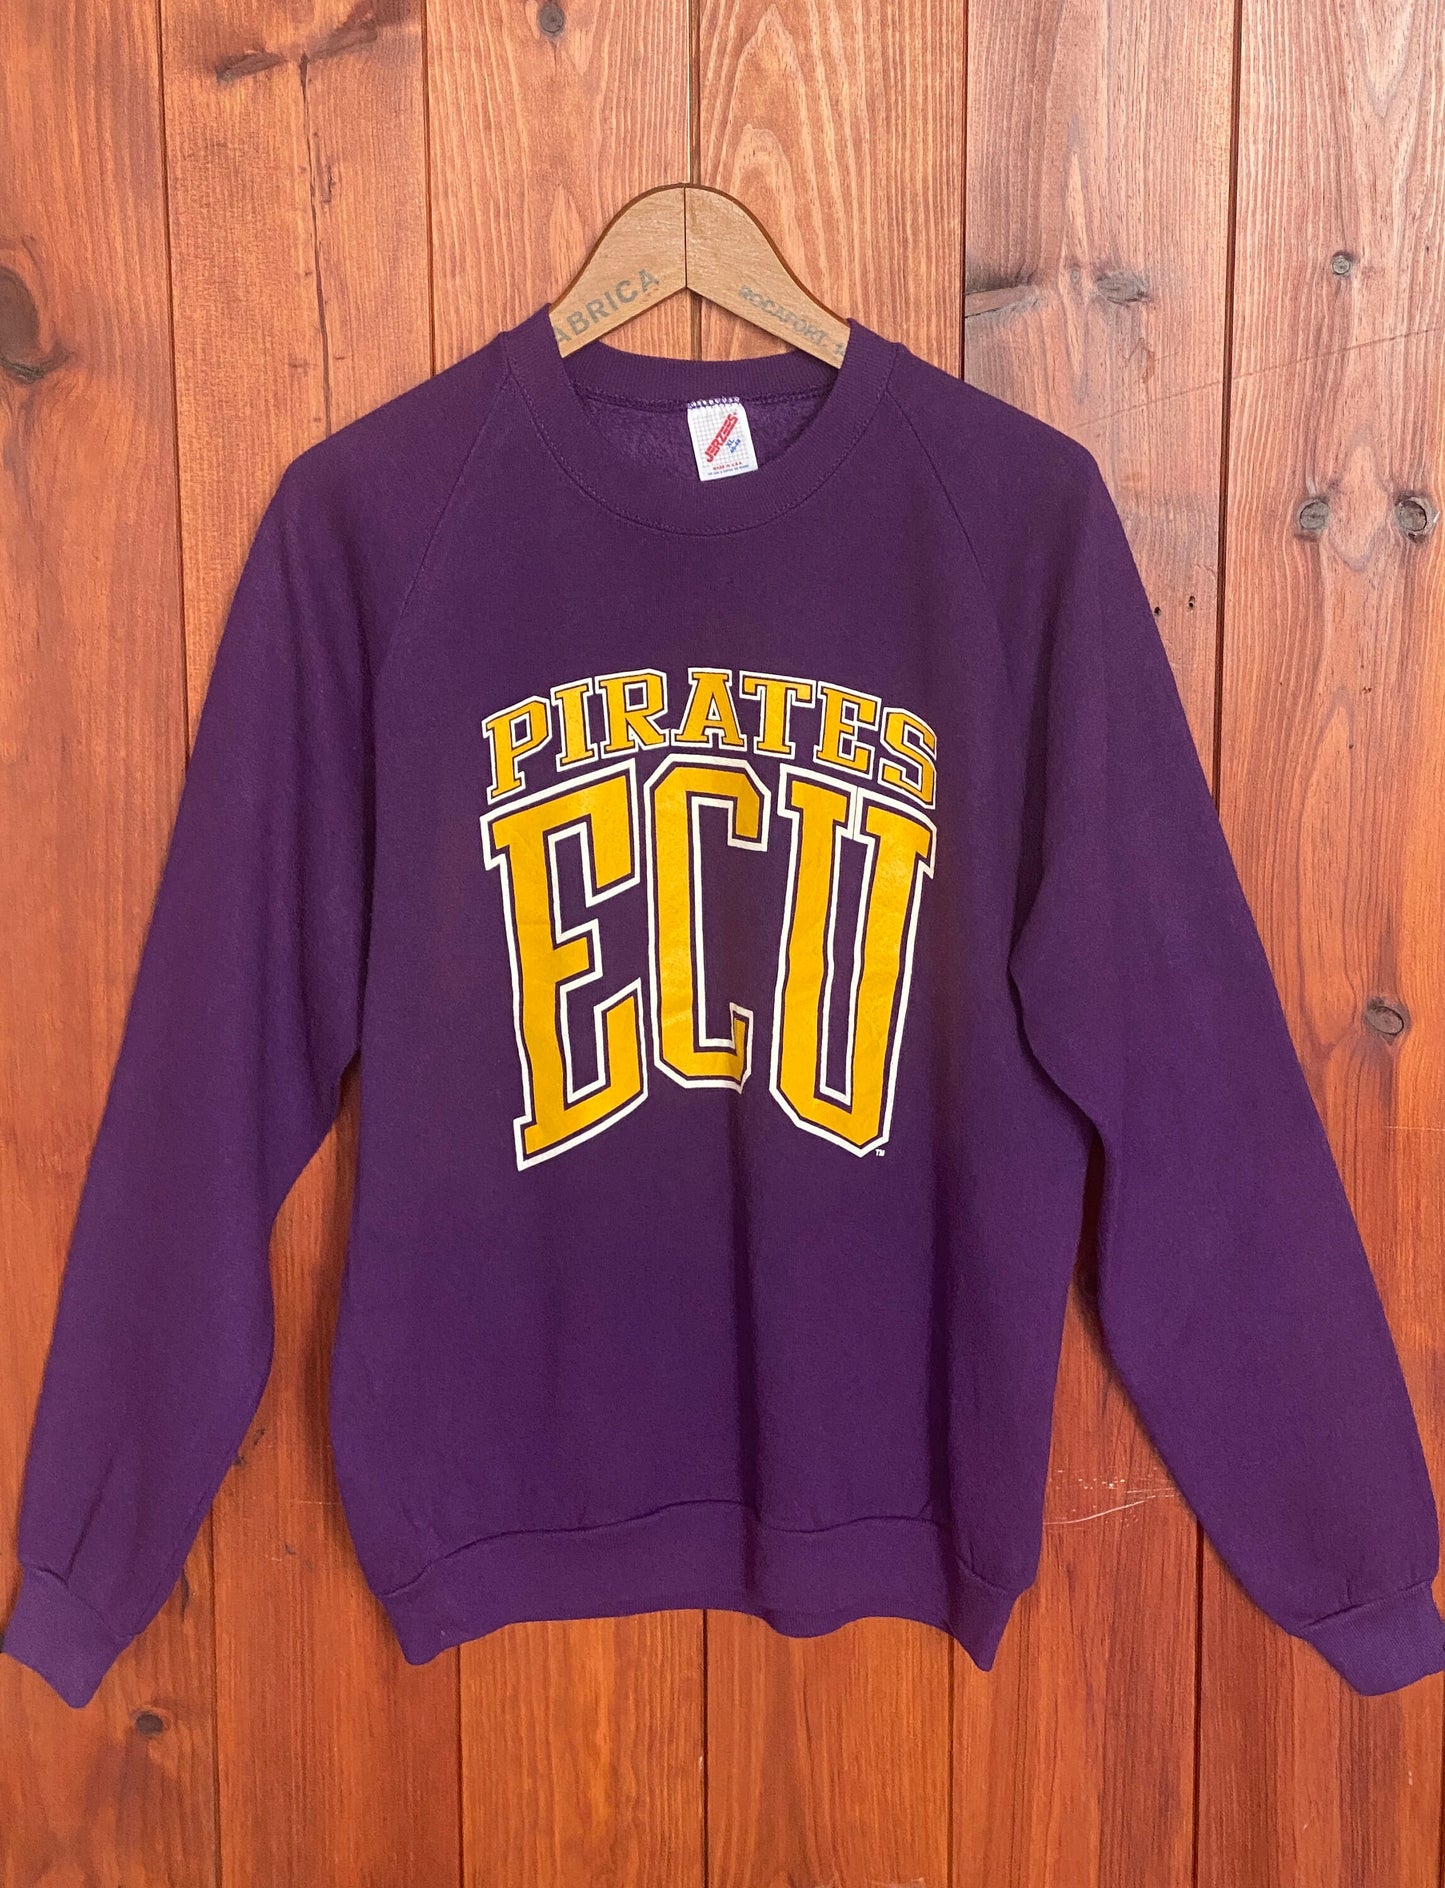 Size XL. Made In USA Vintage 80s Pirates ECU sweatshirt  made by Jerzees